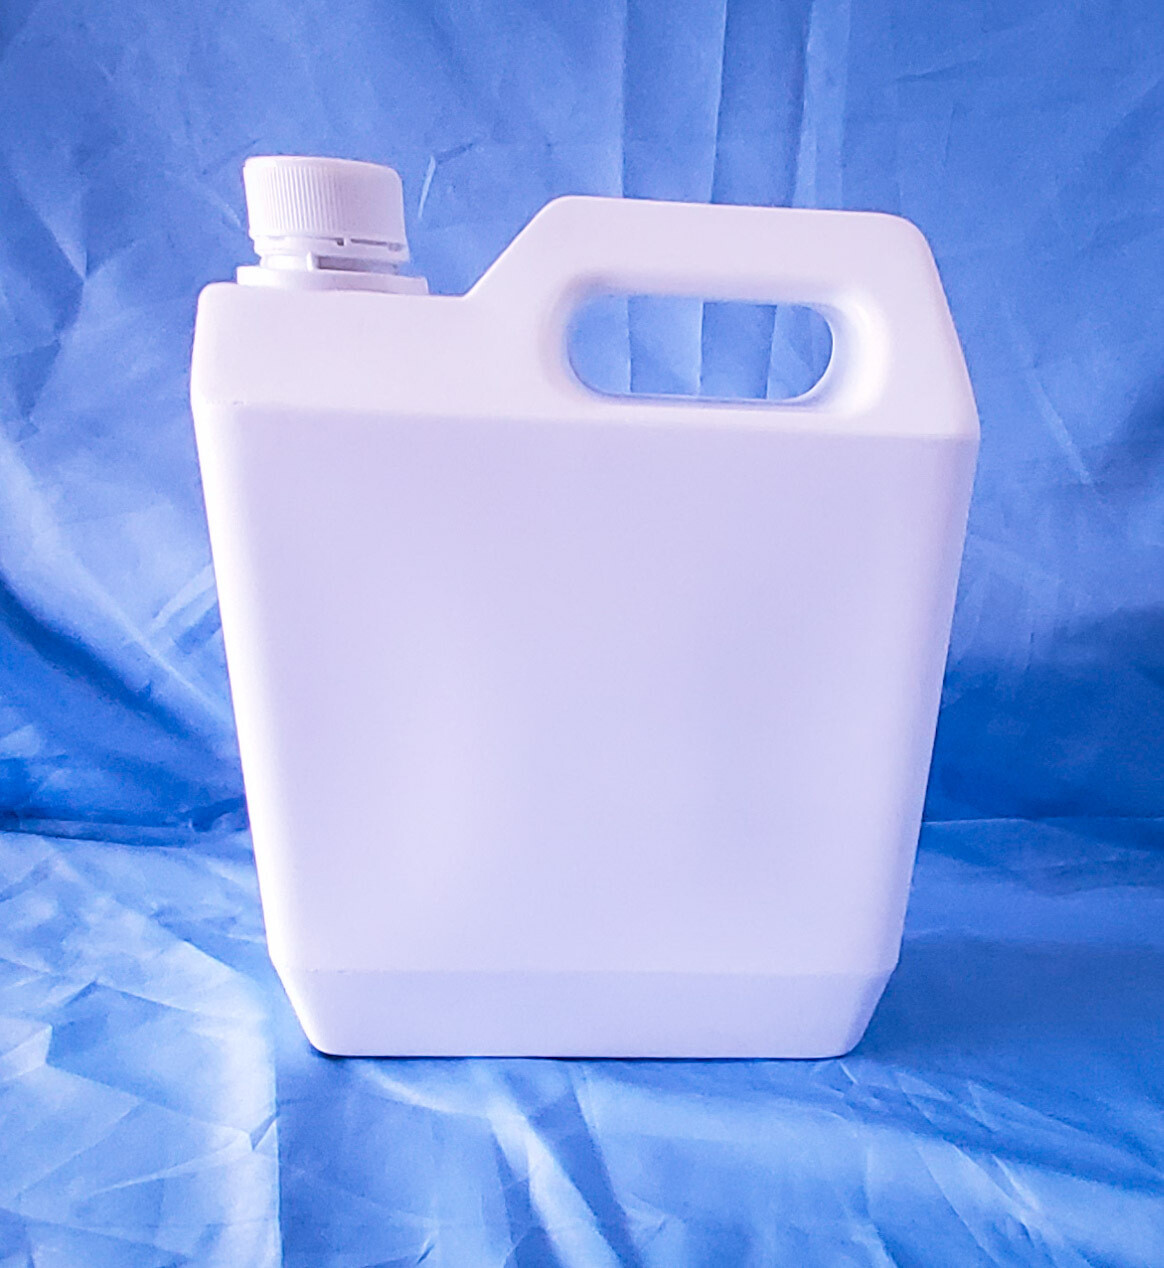 Heavy Duty Square White Gallon Plastic Container for Liquid with White cap and plug 4 liter Capacity